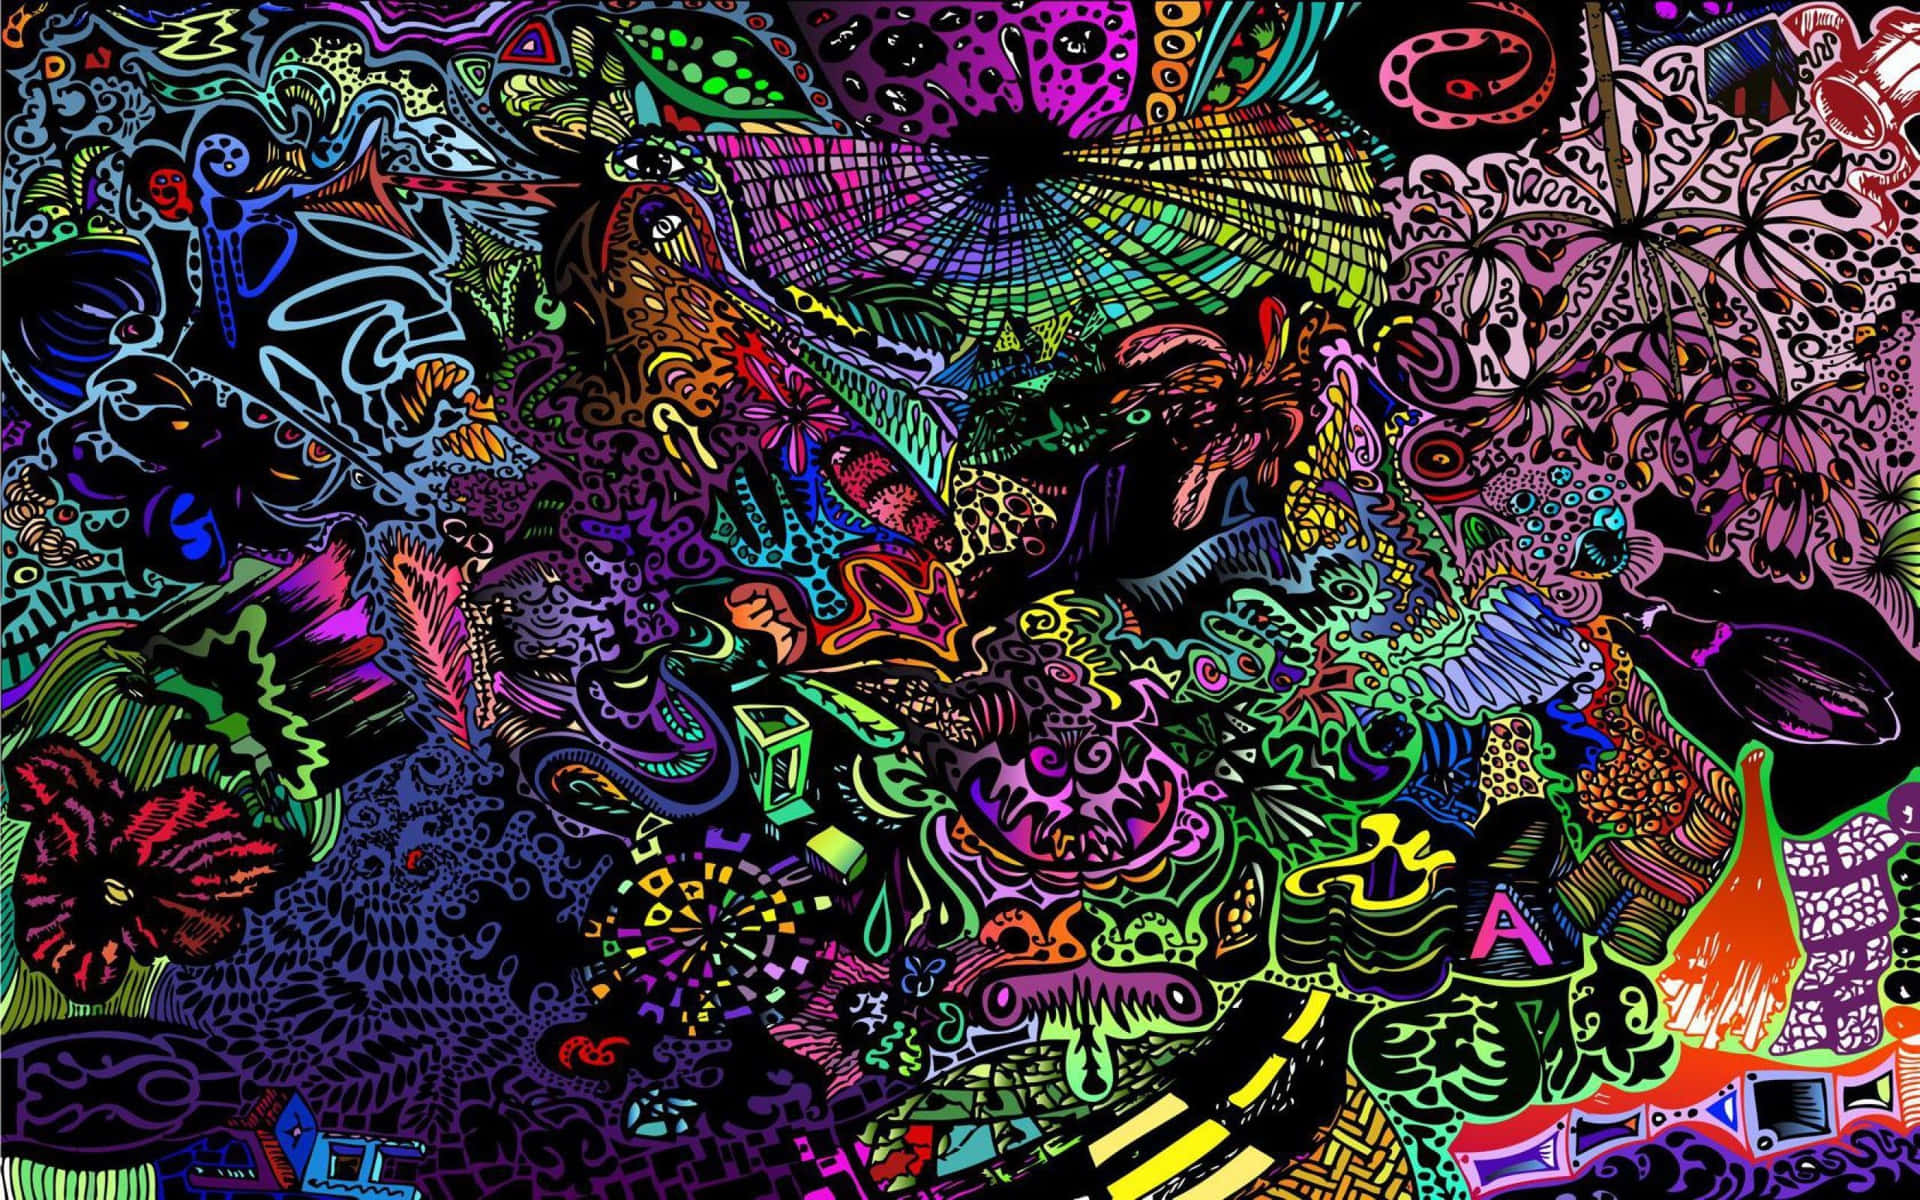 "Explore the Astral Plane with Trippy Stoner" Wallpaper